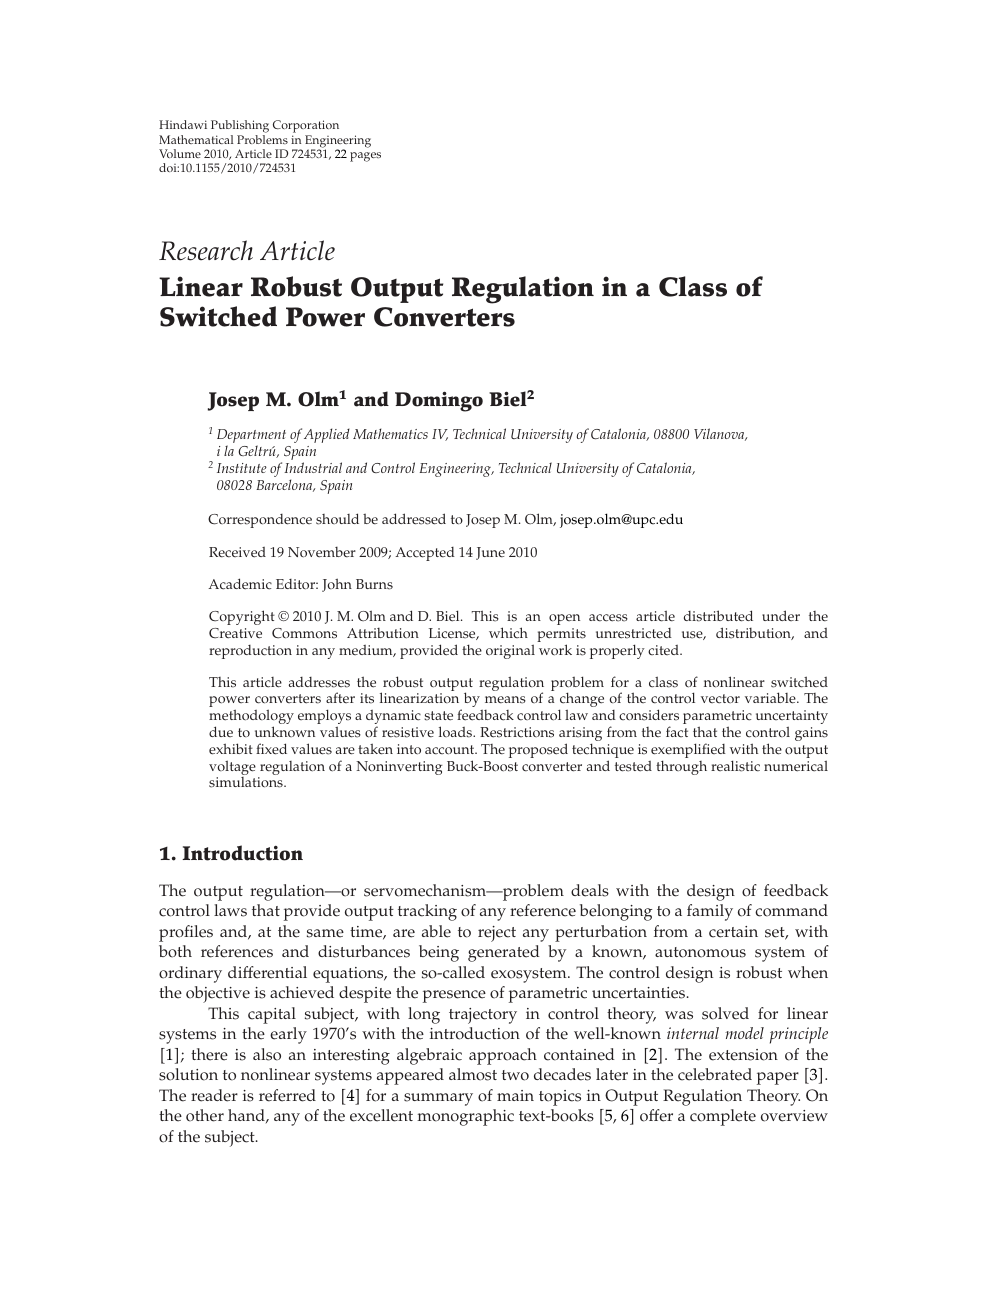 Linear Robust Output Regulation In A Class Of Switched Power Converters Topic Of Research Paper In Mathematics Download Scholarly Article Pdf And Read For Free On Cyberleninka Open Science Hub